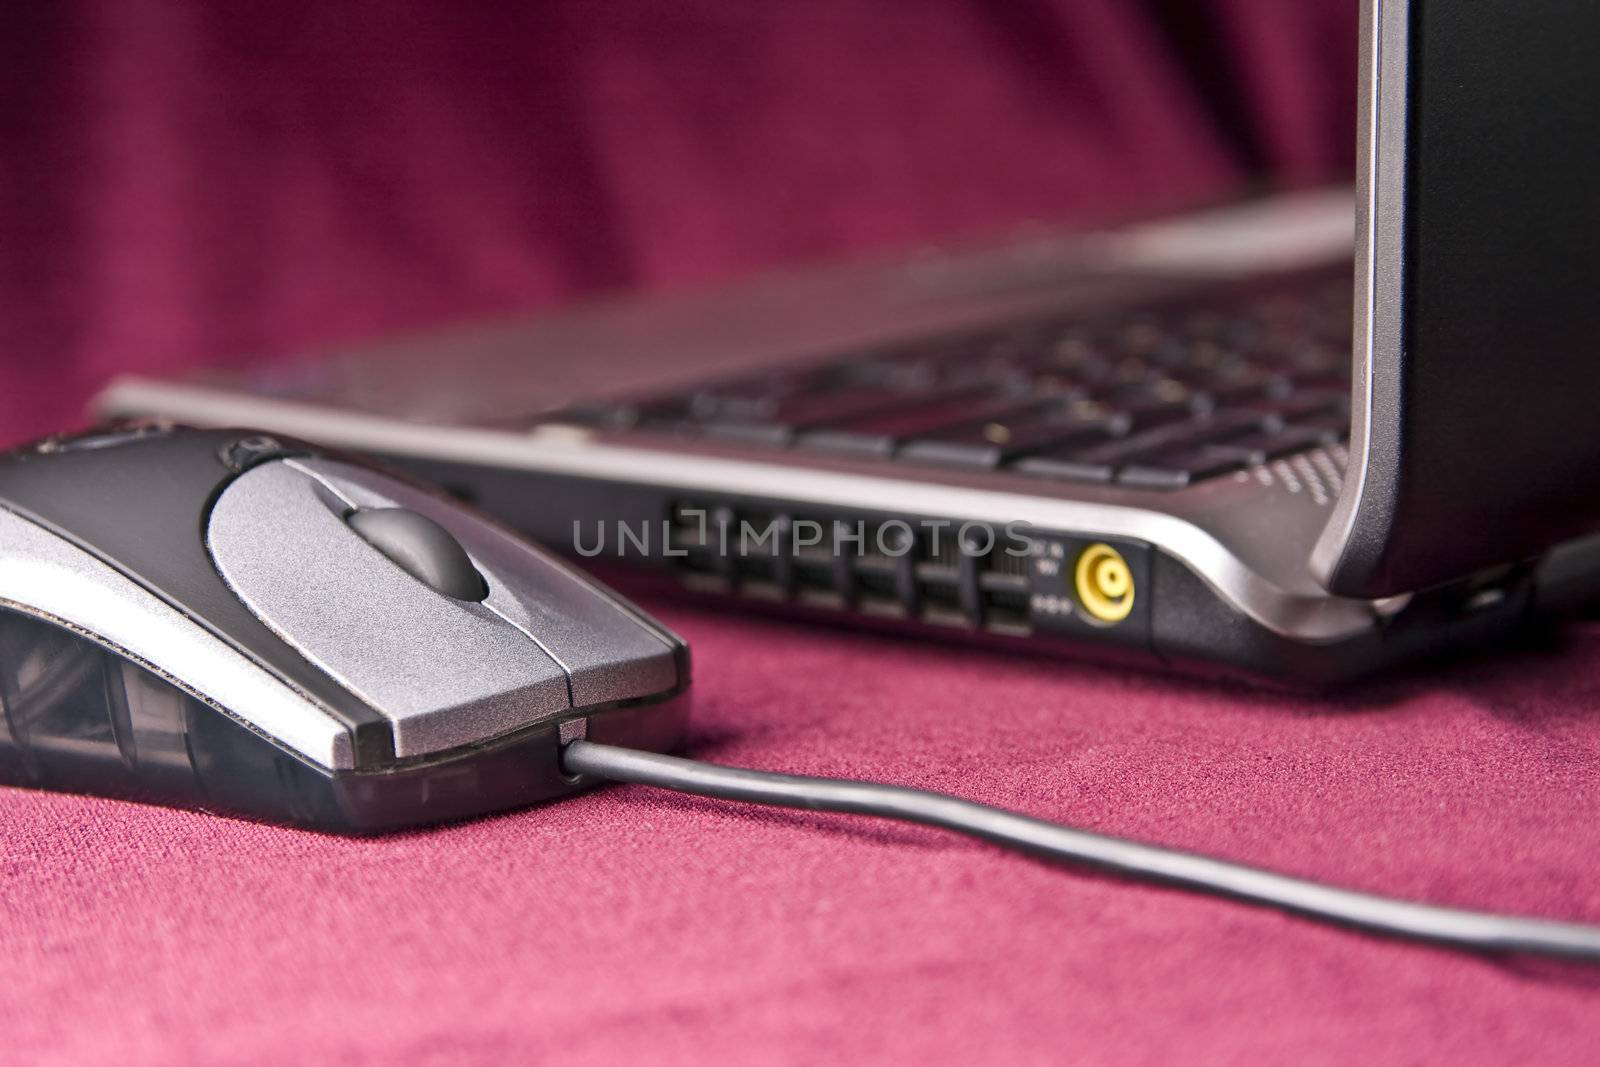 The grey computer mouse and modern laptop on a claret background